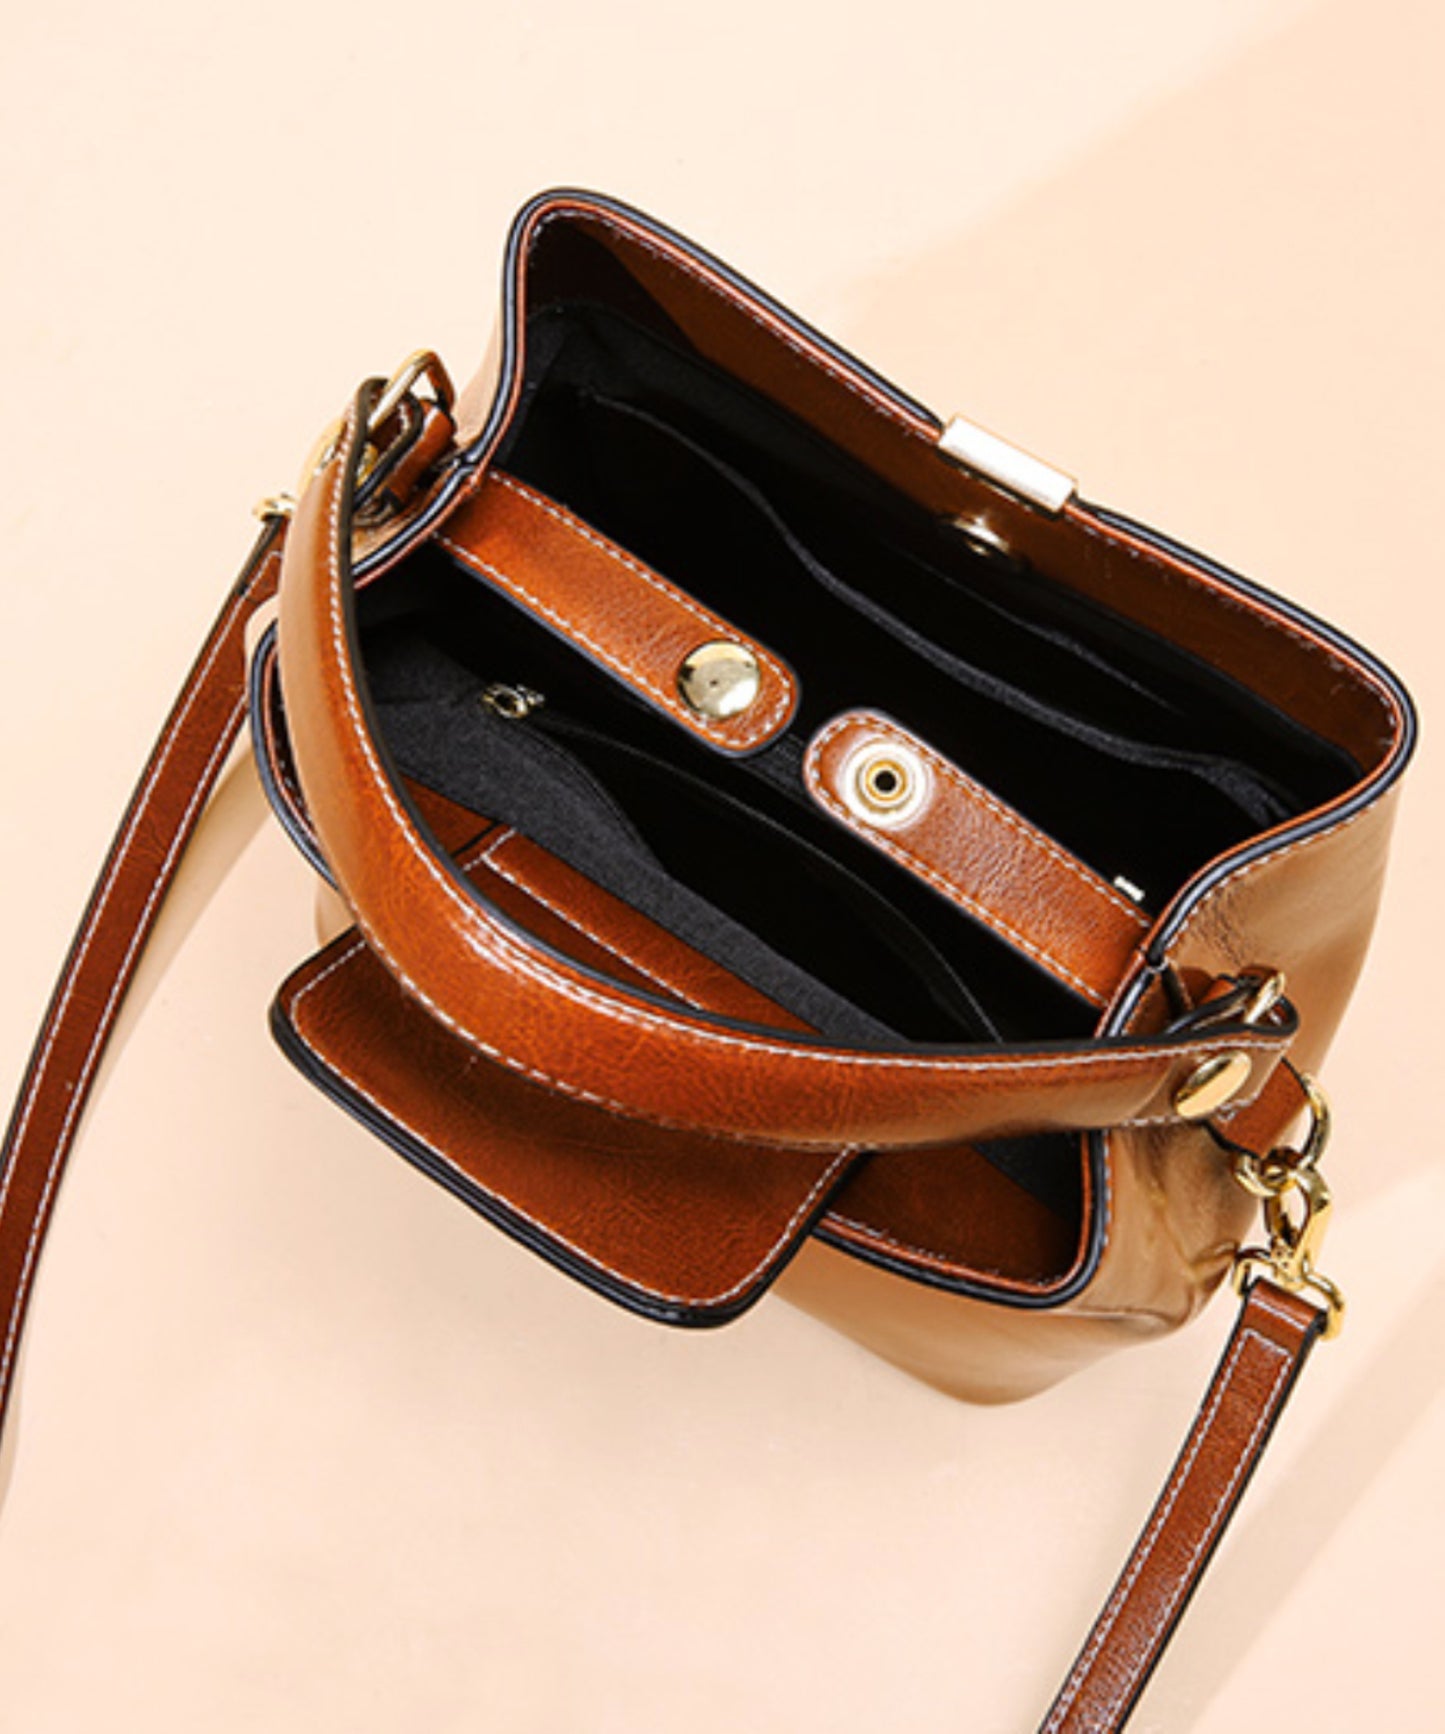 Rofozzi Terra Small Structured Leather Bucket Bag